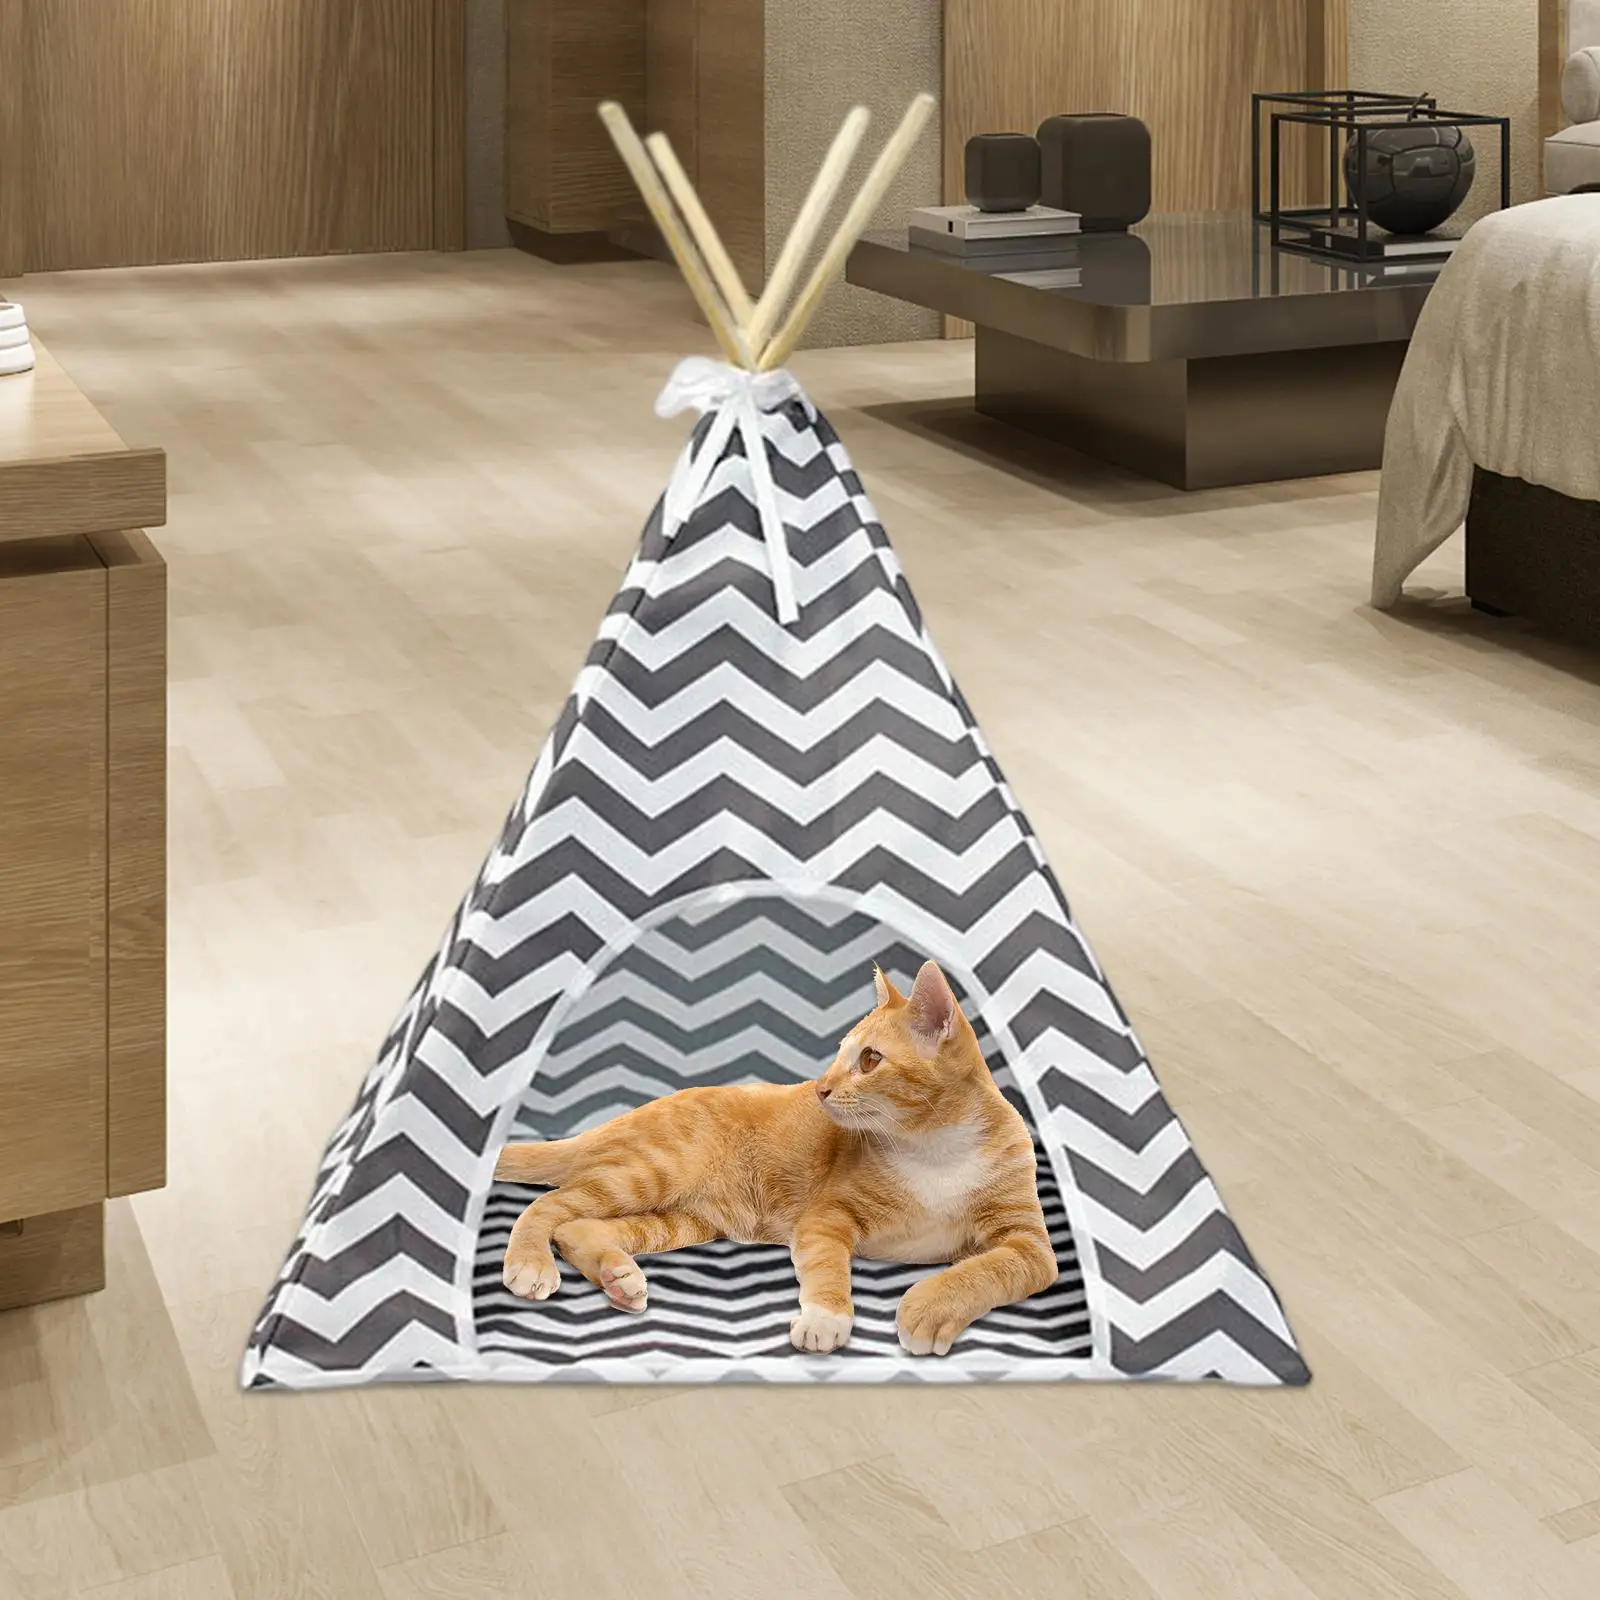 Portable Pet Teepee Cat Tent Bed Dog House Hut Winter Tent Nest Kennel Mat Breathable Cushion Sleeping Bed Warm for Supplies